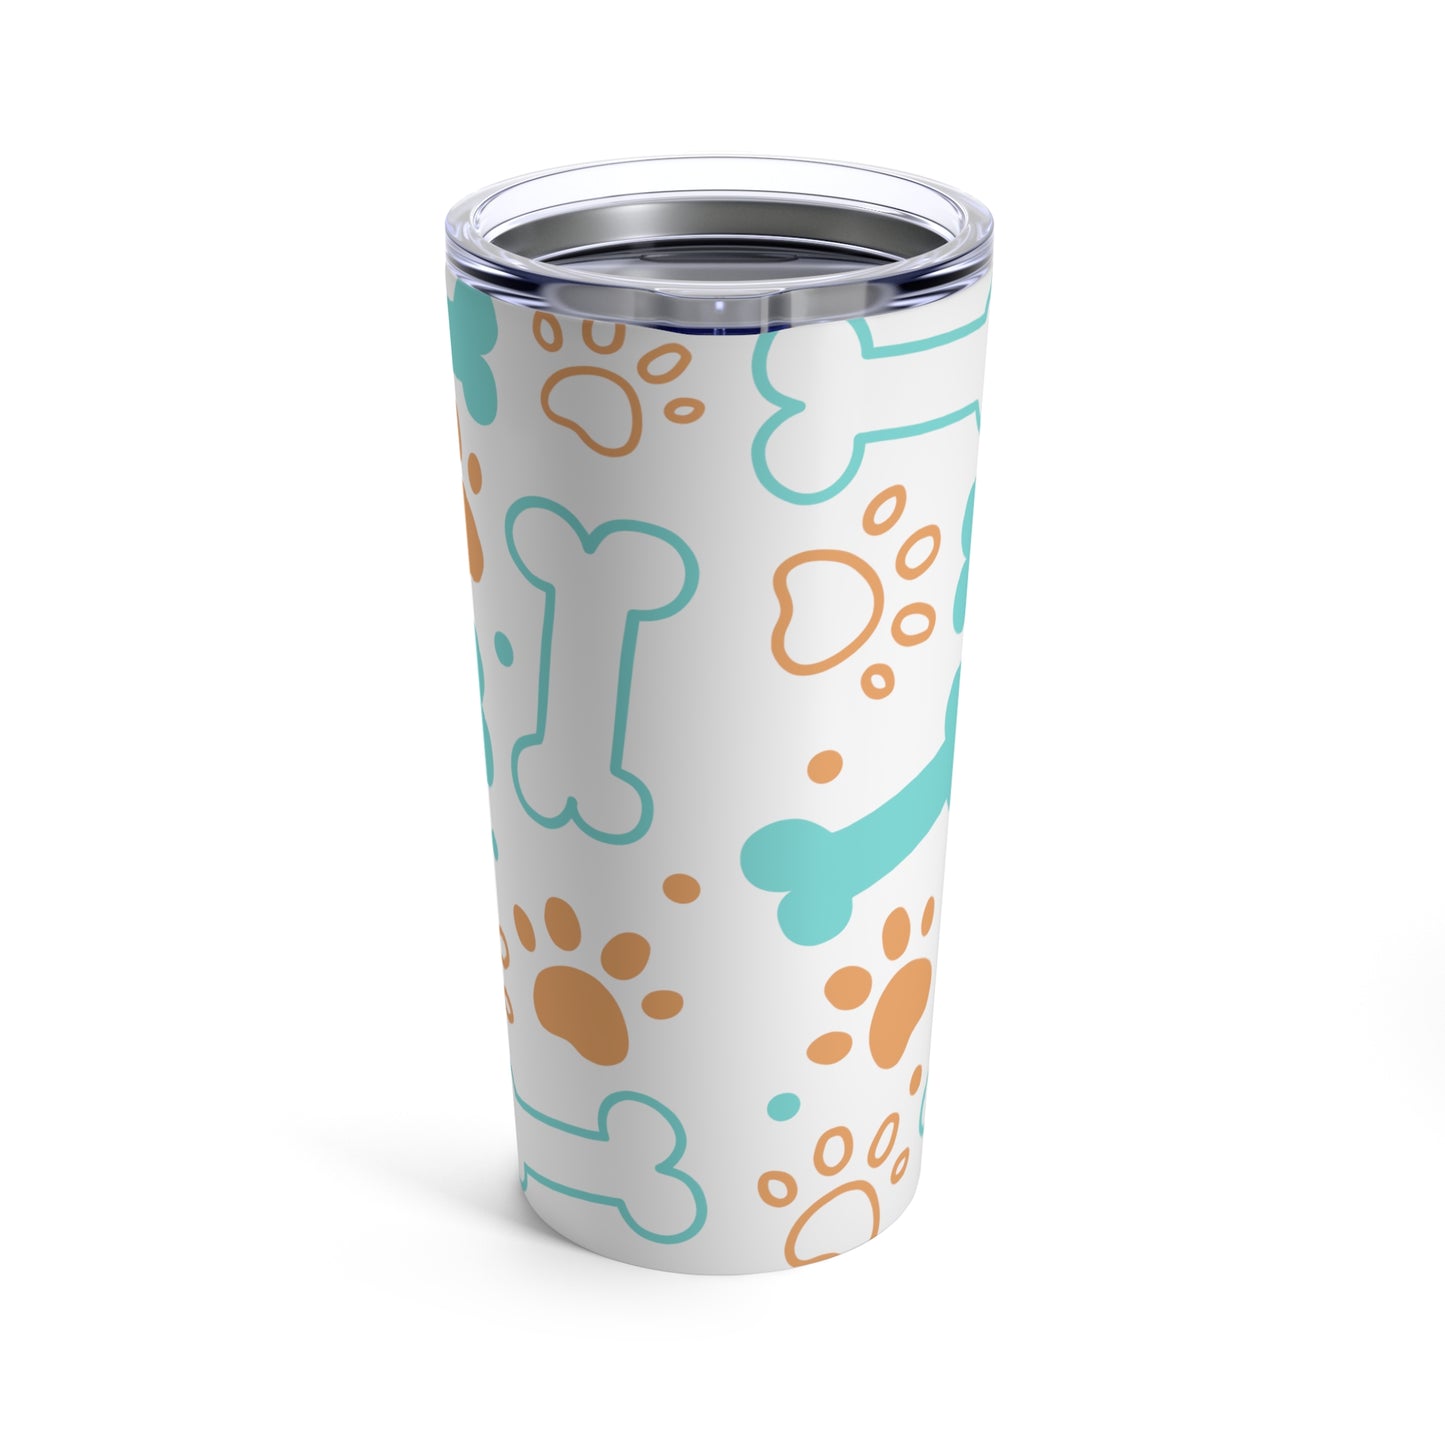 A Printify Dog Lover Tumbler: 20 oz. stainless steel; insulated, featuring dog paws and bones design.